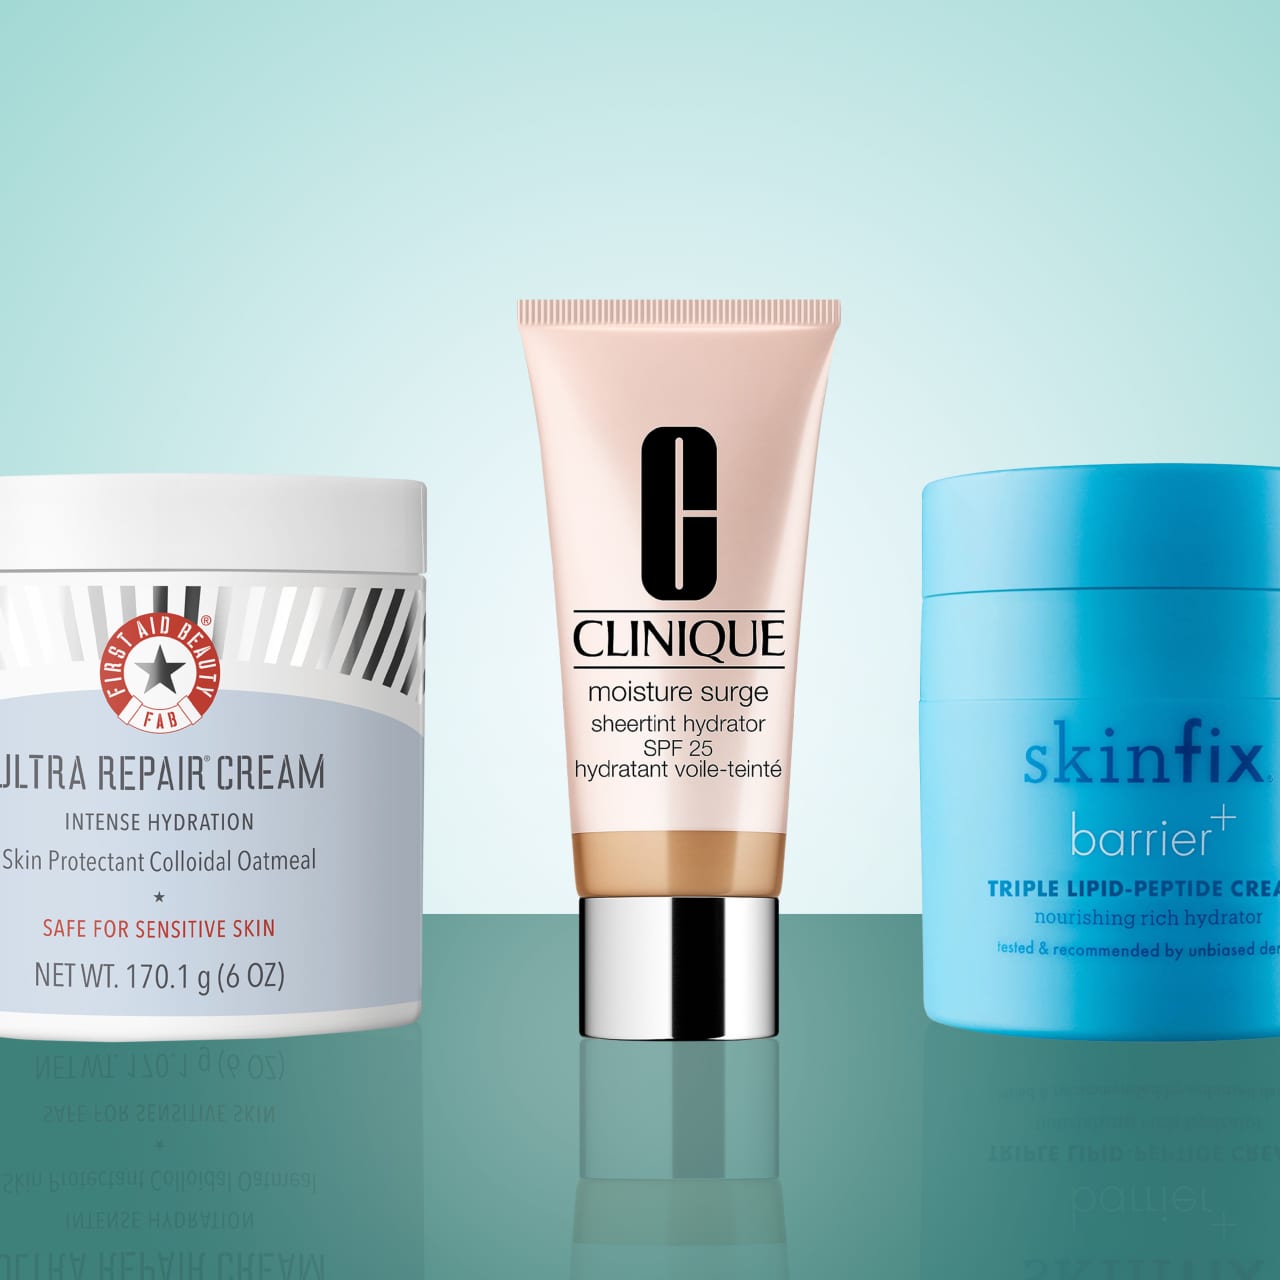 The Best Face Moisturizers for Dry Skin, According to